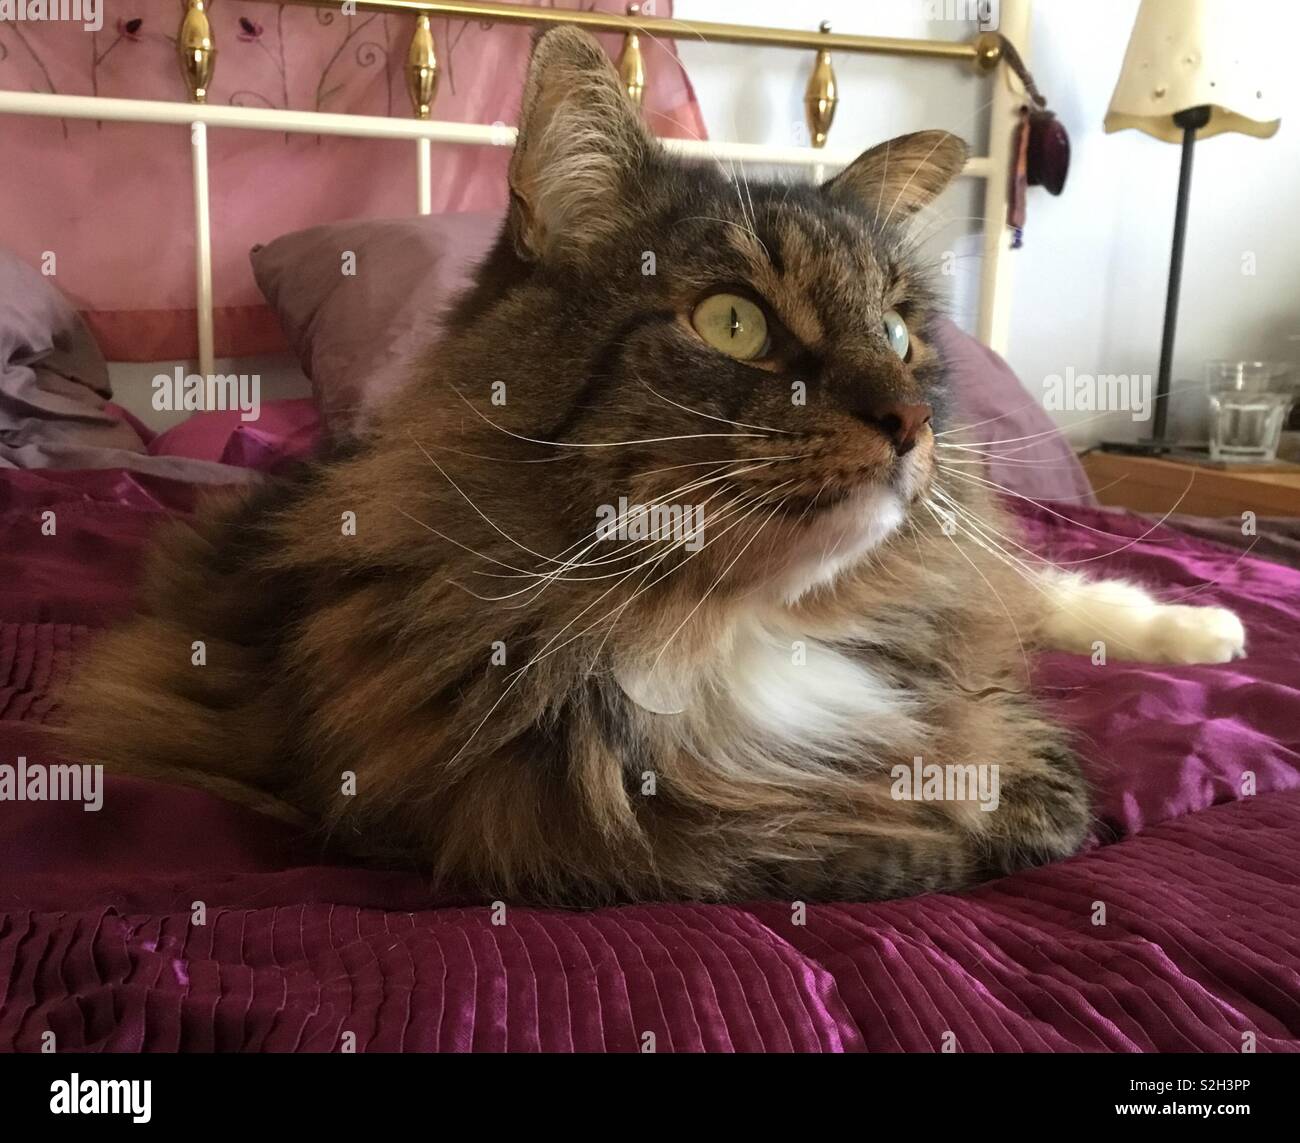 Regal Norwegian Forest Cat reclining on a Purple quilt on a bed with an alert relaxed expression. Stock Photo